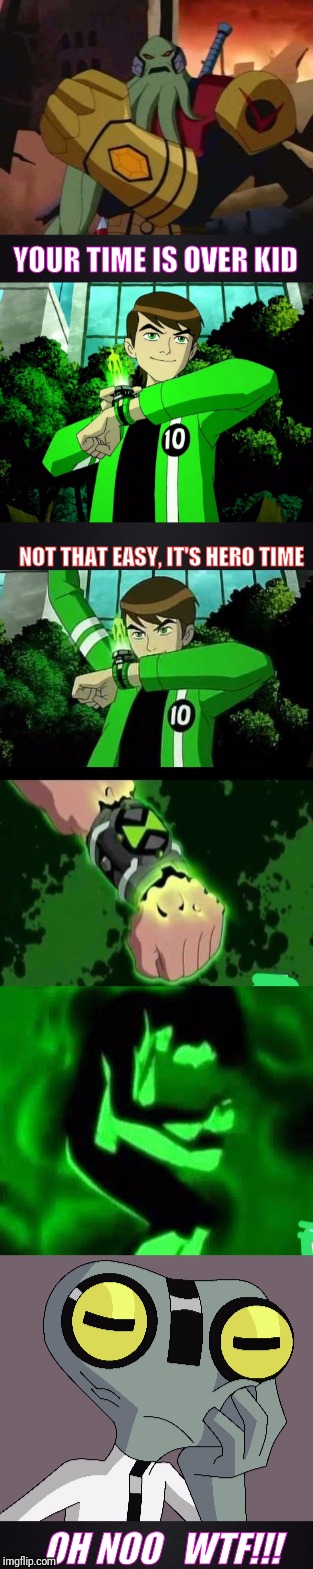 Problem with Ben 10 | YOUR TIME IS OVER KID; NOT THAT EASY, IT'S HERO TIME; OH NOO   WTF!!! | image tagged in funny,hilarious,ben 10,comedy,cartoons | made w/ Imgflip meme maker